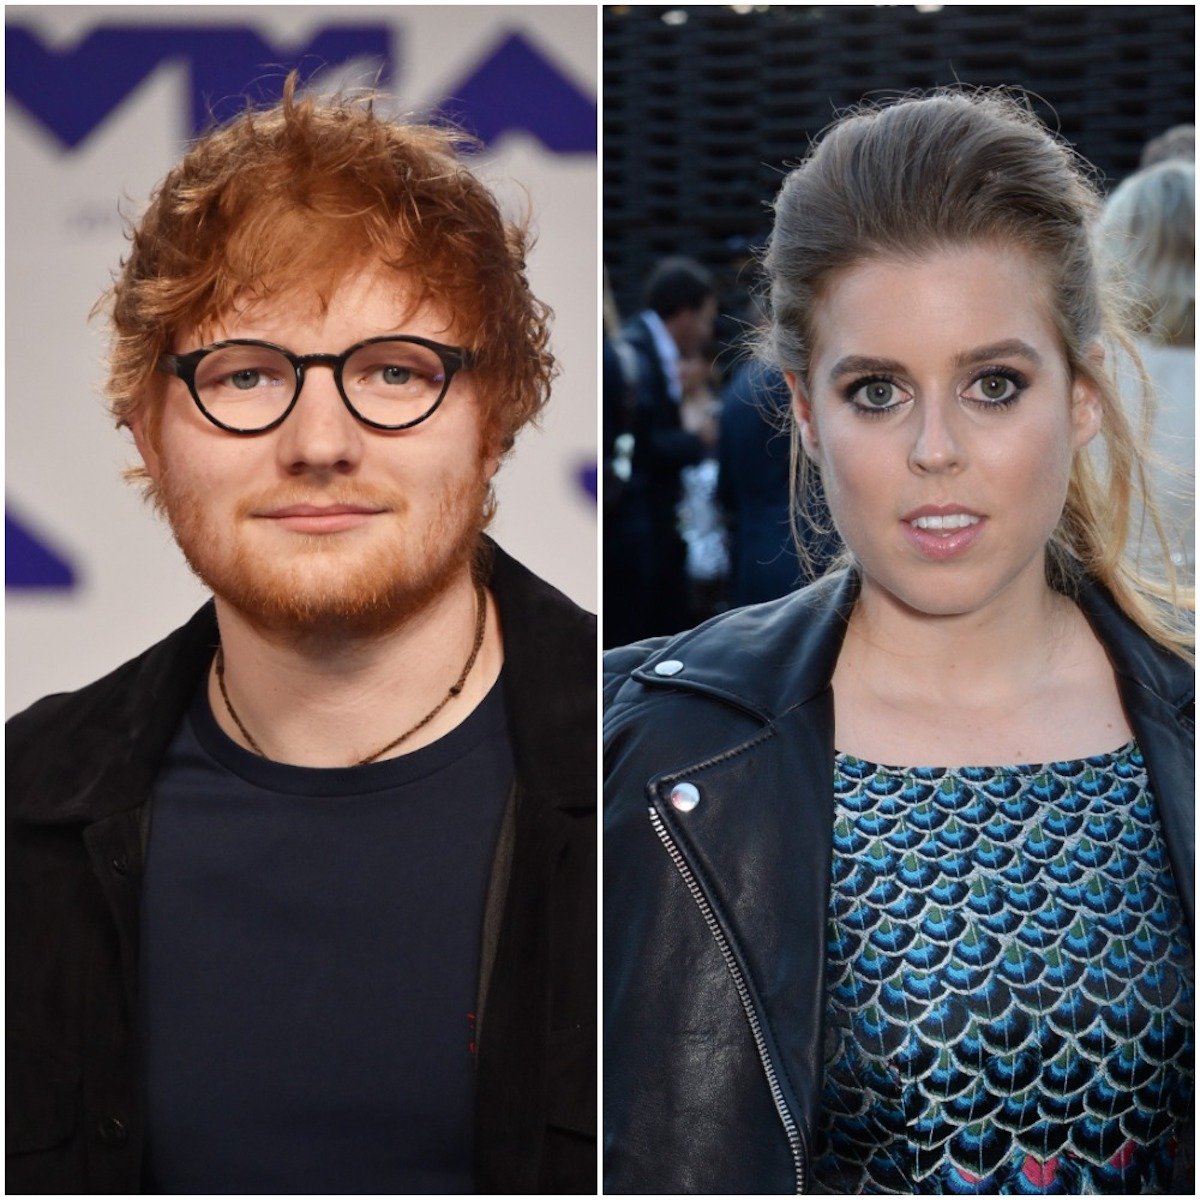 Ed Sheeran attends the 2017 MTV Video Music Awards and : Princess Beatrice of York attends the annual summer party in partnership with Chane